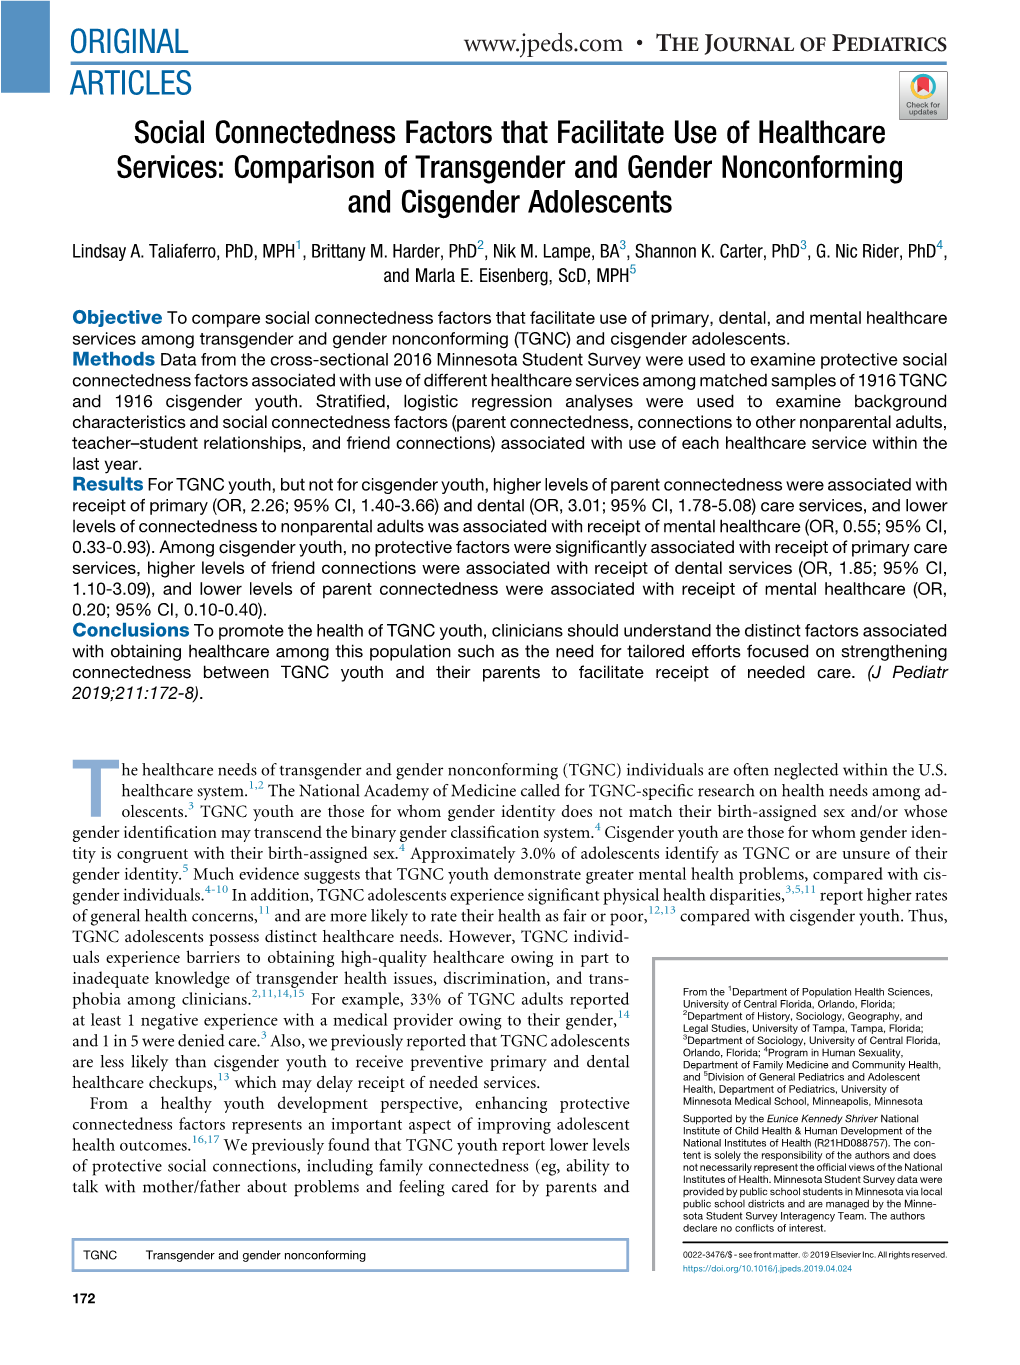 Social Connectedness Factors That Facilitate Use of Healthcare Services: Comparison of Transgender and Gender Nonconforming and Cisgender Adolescents